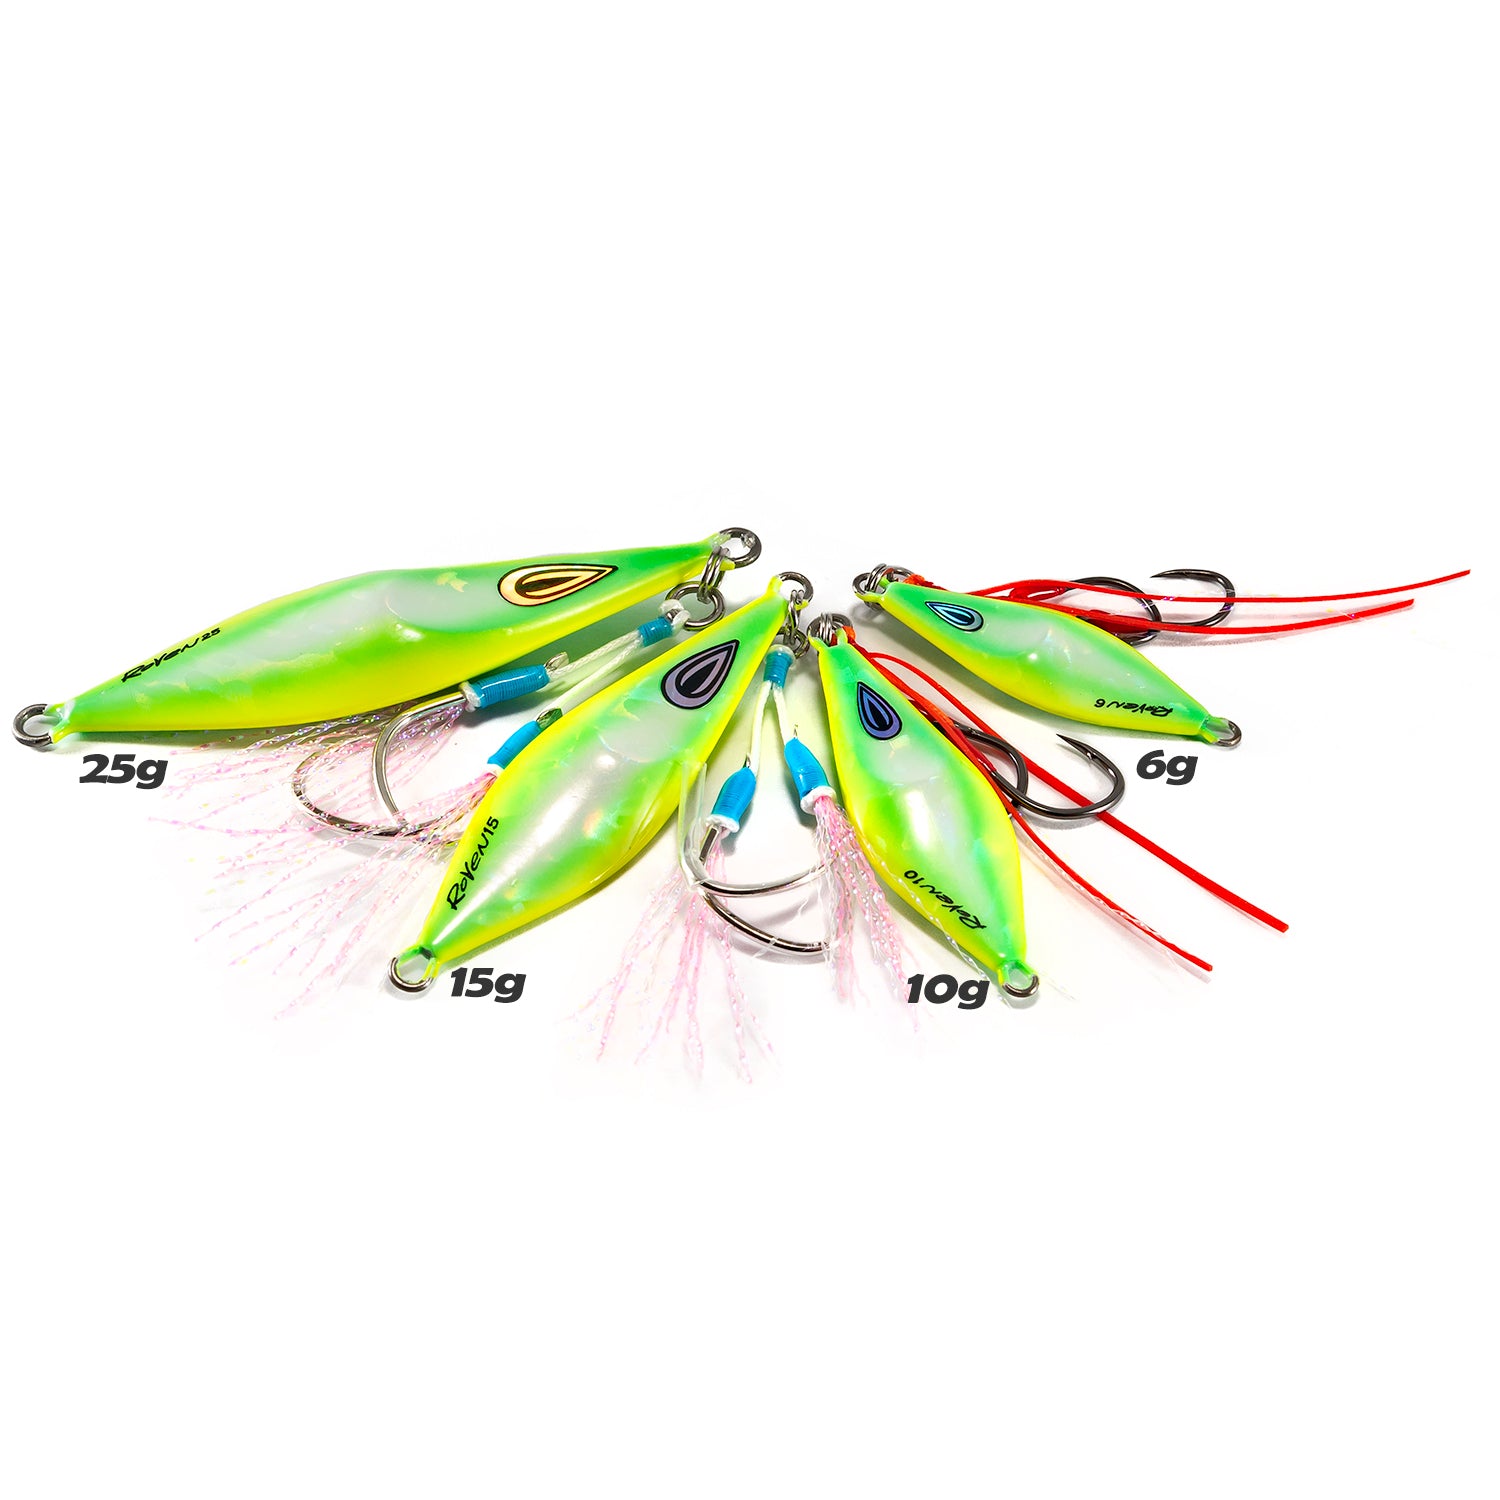 Oceans Legacy Roven Jig Rigged 10g Sizes